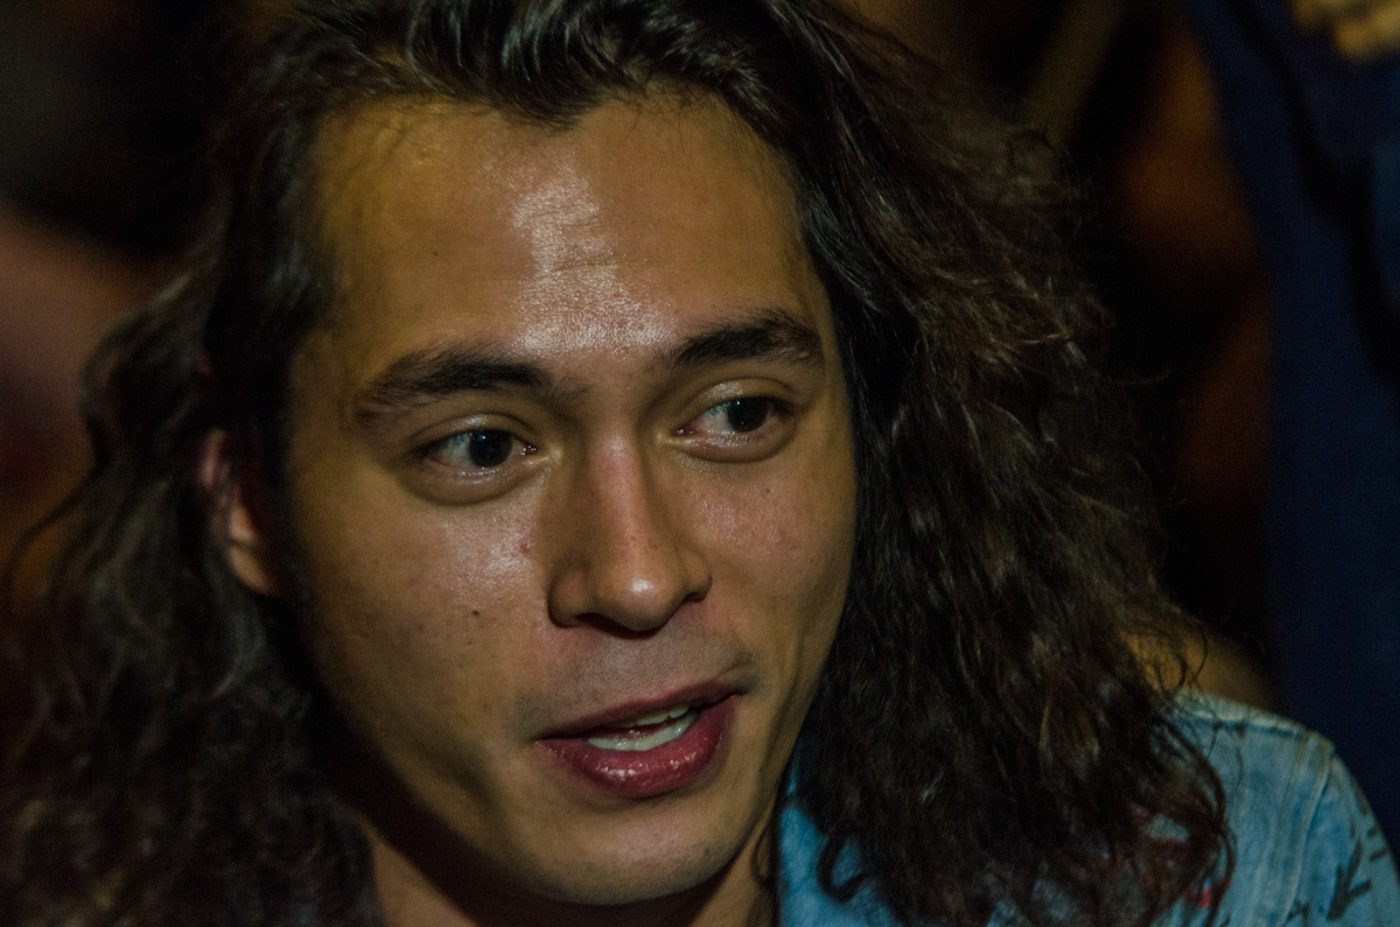 ICONIC VILLAIN. Jake Cuenca tests his acting skills as Lizardo in the movie 